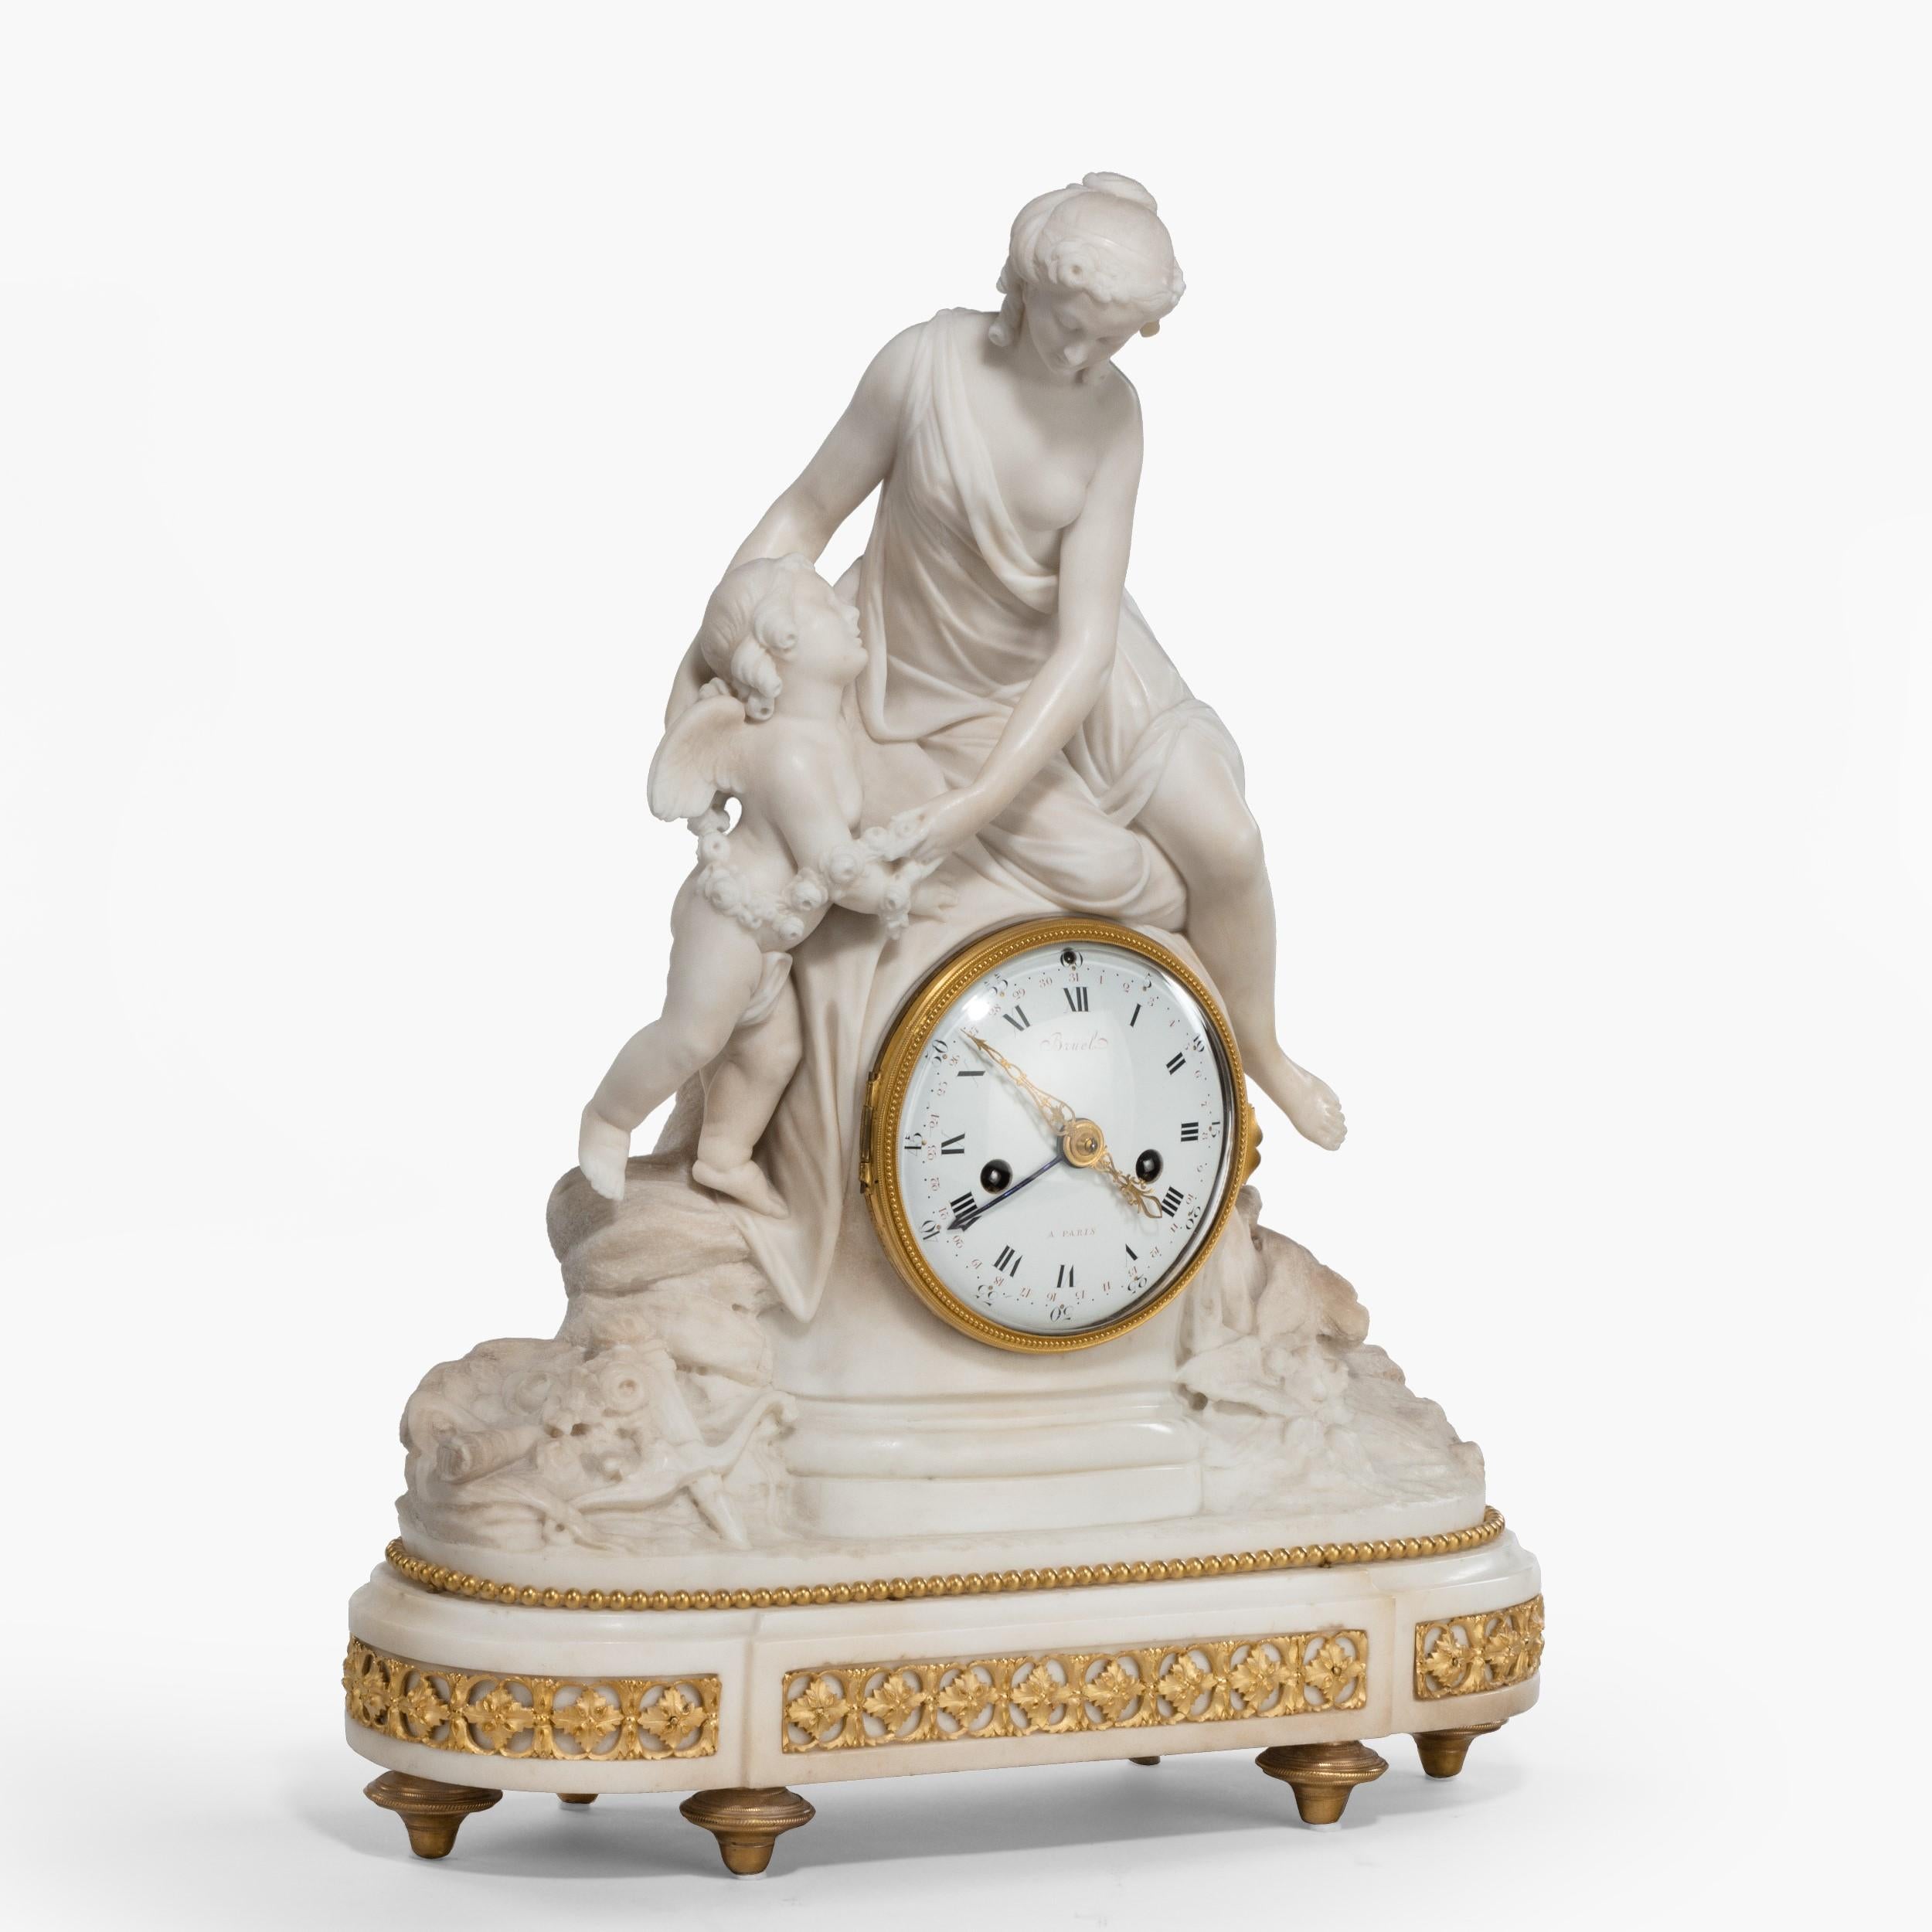 A Louis XVI period mantel (fireplace) clock by Bruel of Paris

Constructed in Carrara marble and ormolu, rising from an ormolu dressed elliptical base supported by bronze toupie feet, the figures of Psyche and Cupid rest on a rocaille ground,